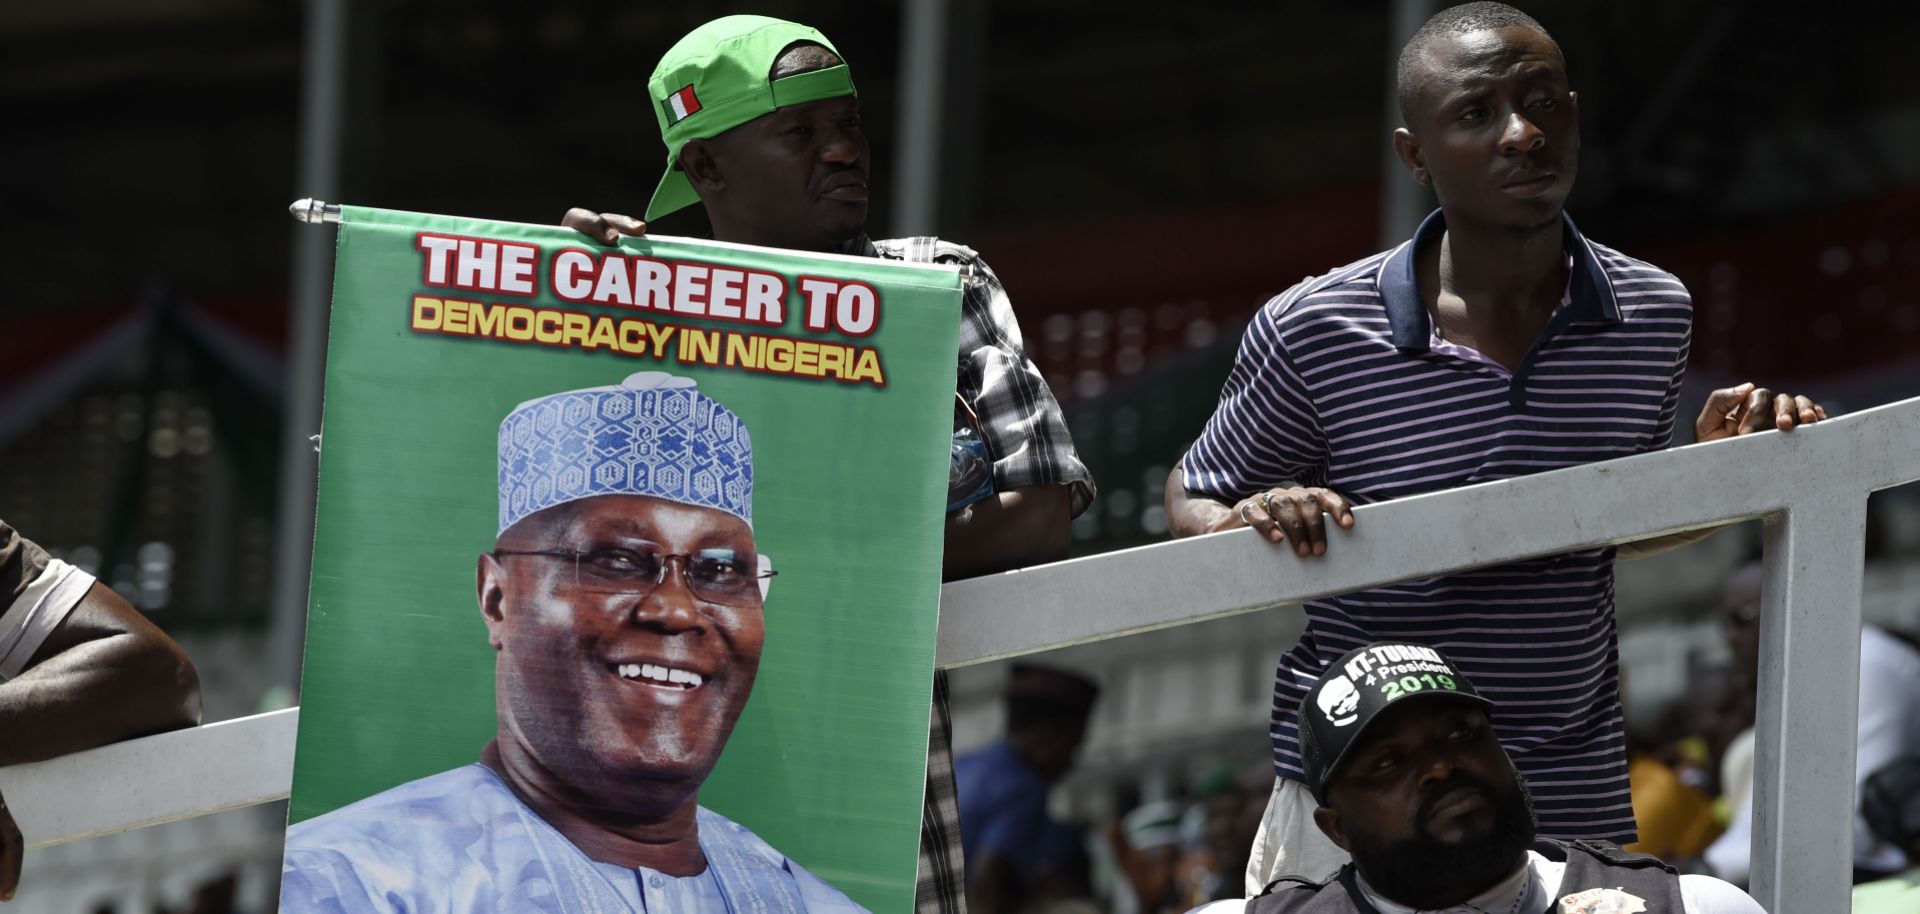 Atiku Abubakar, the candidate from the resurgent People's Democratic Party, hopes to unseat President Muhammadu Buhari, whose health concerns are a factor for Nigerian voters.